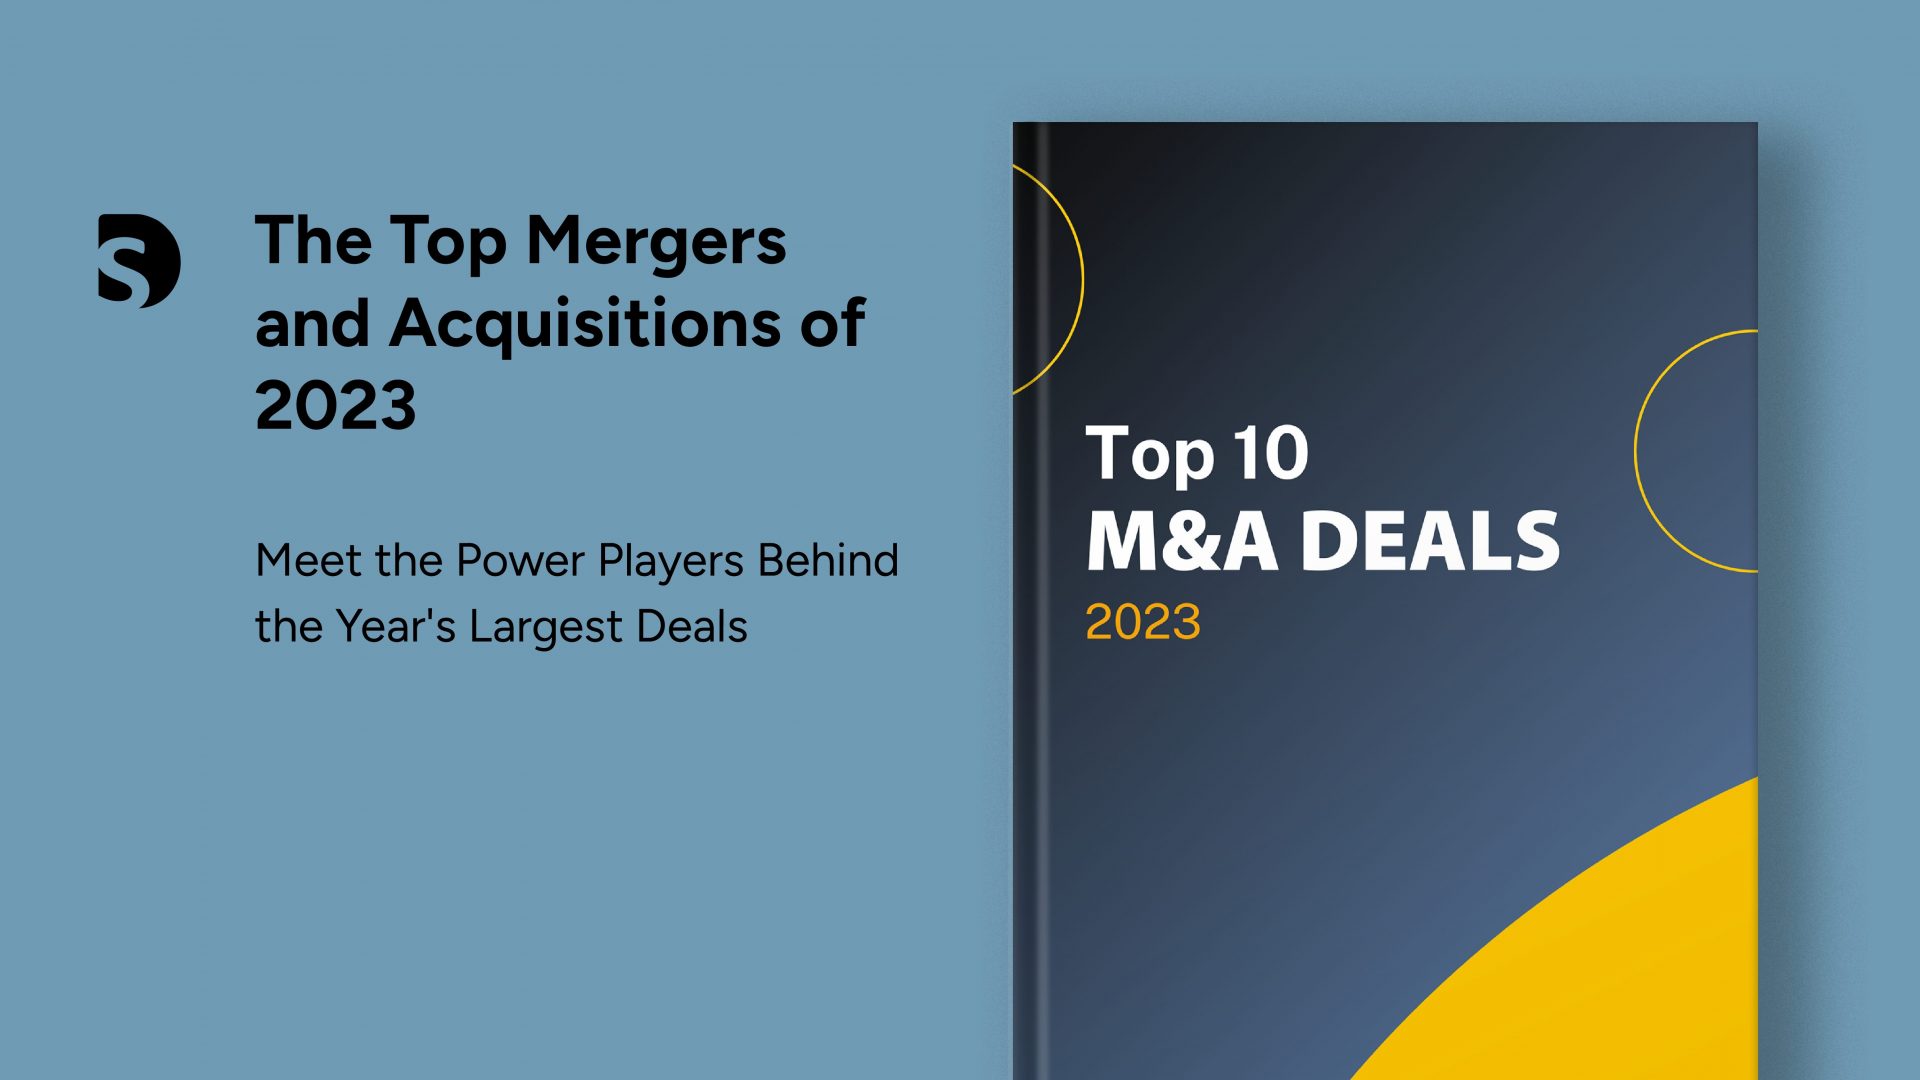 The Top Mergers and Acquisitions of 2023 – Meet the Power Players Behind the Year’s Largest Deals